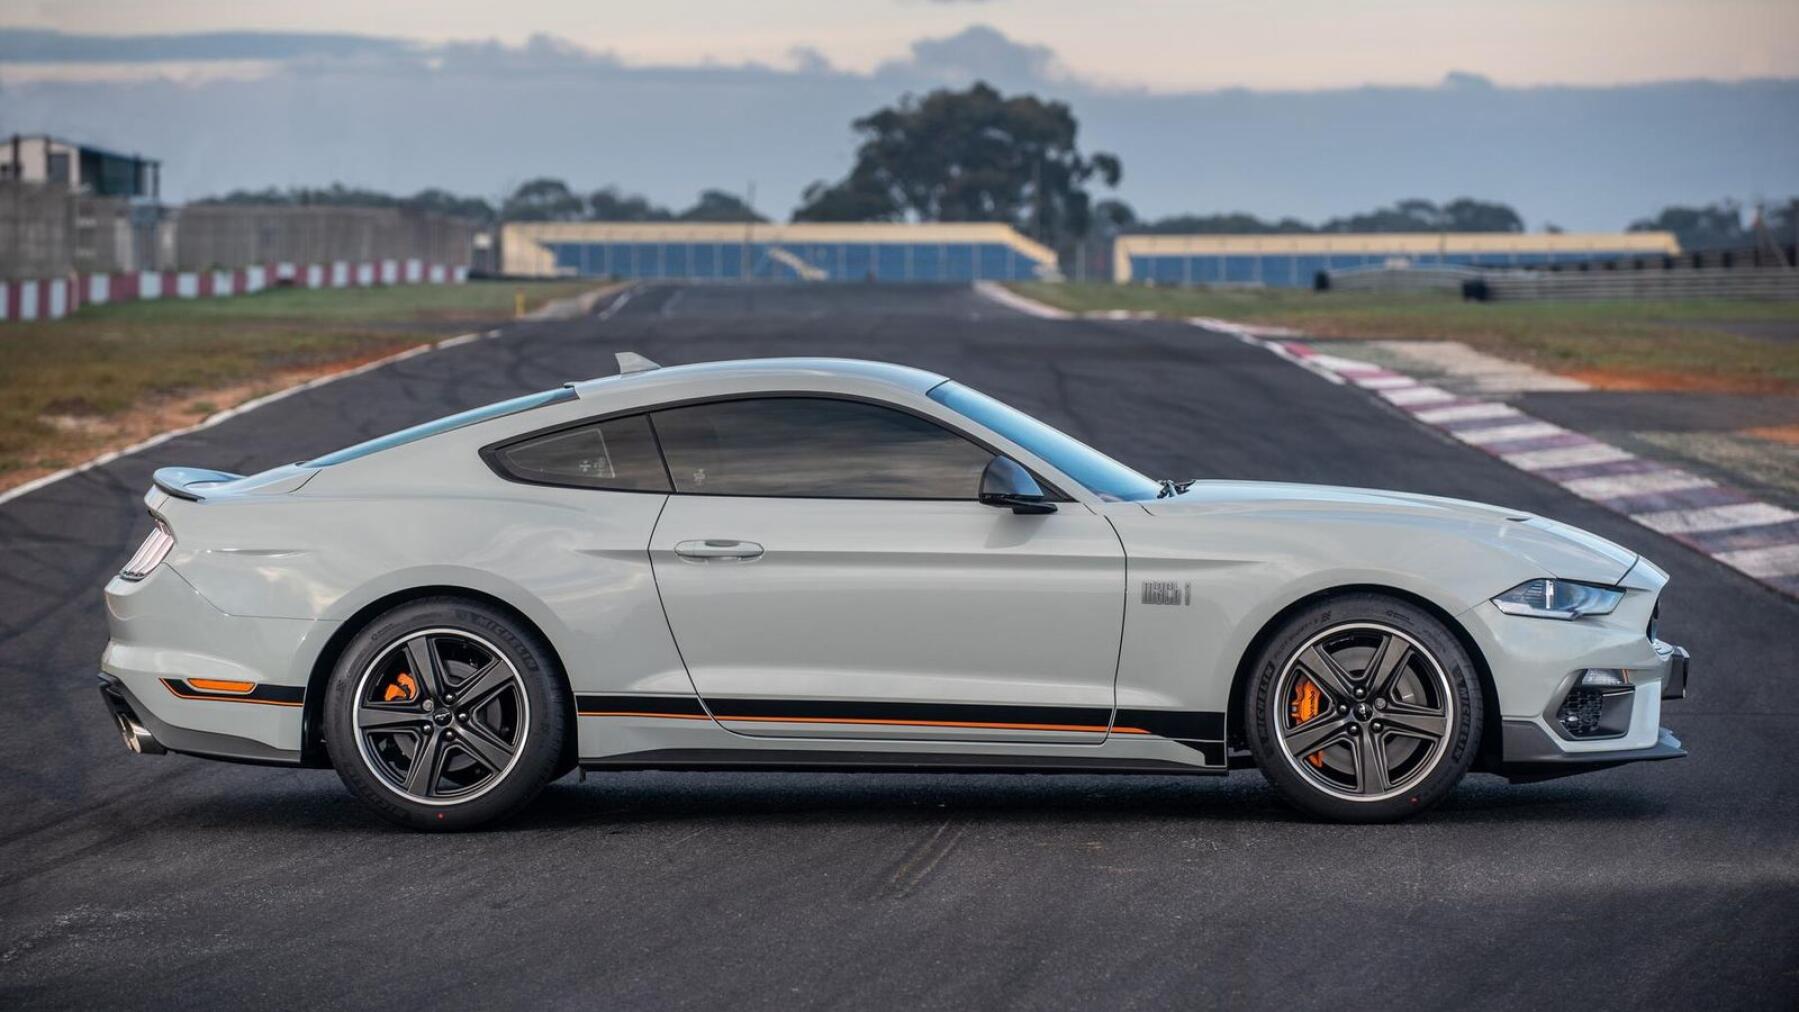 2021 Ford Mustang Mach 1 side view